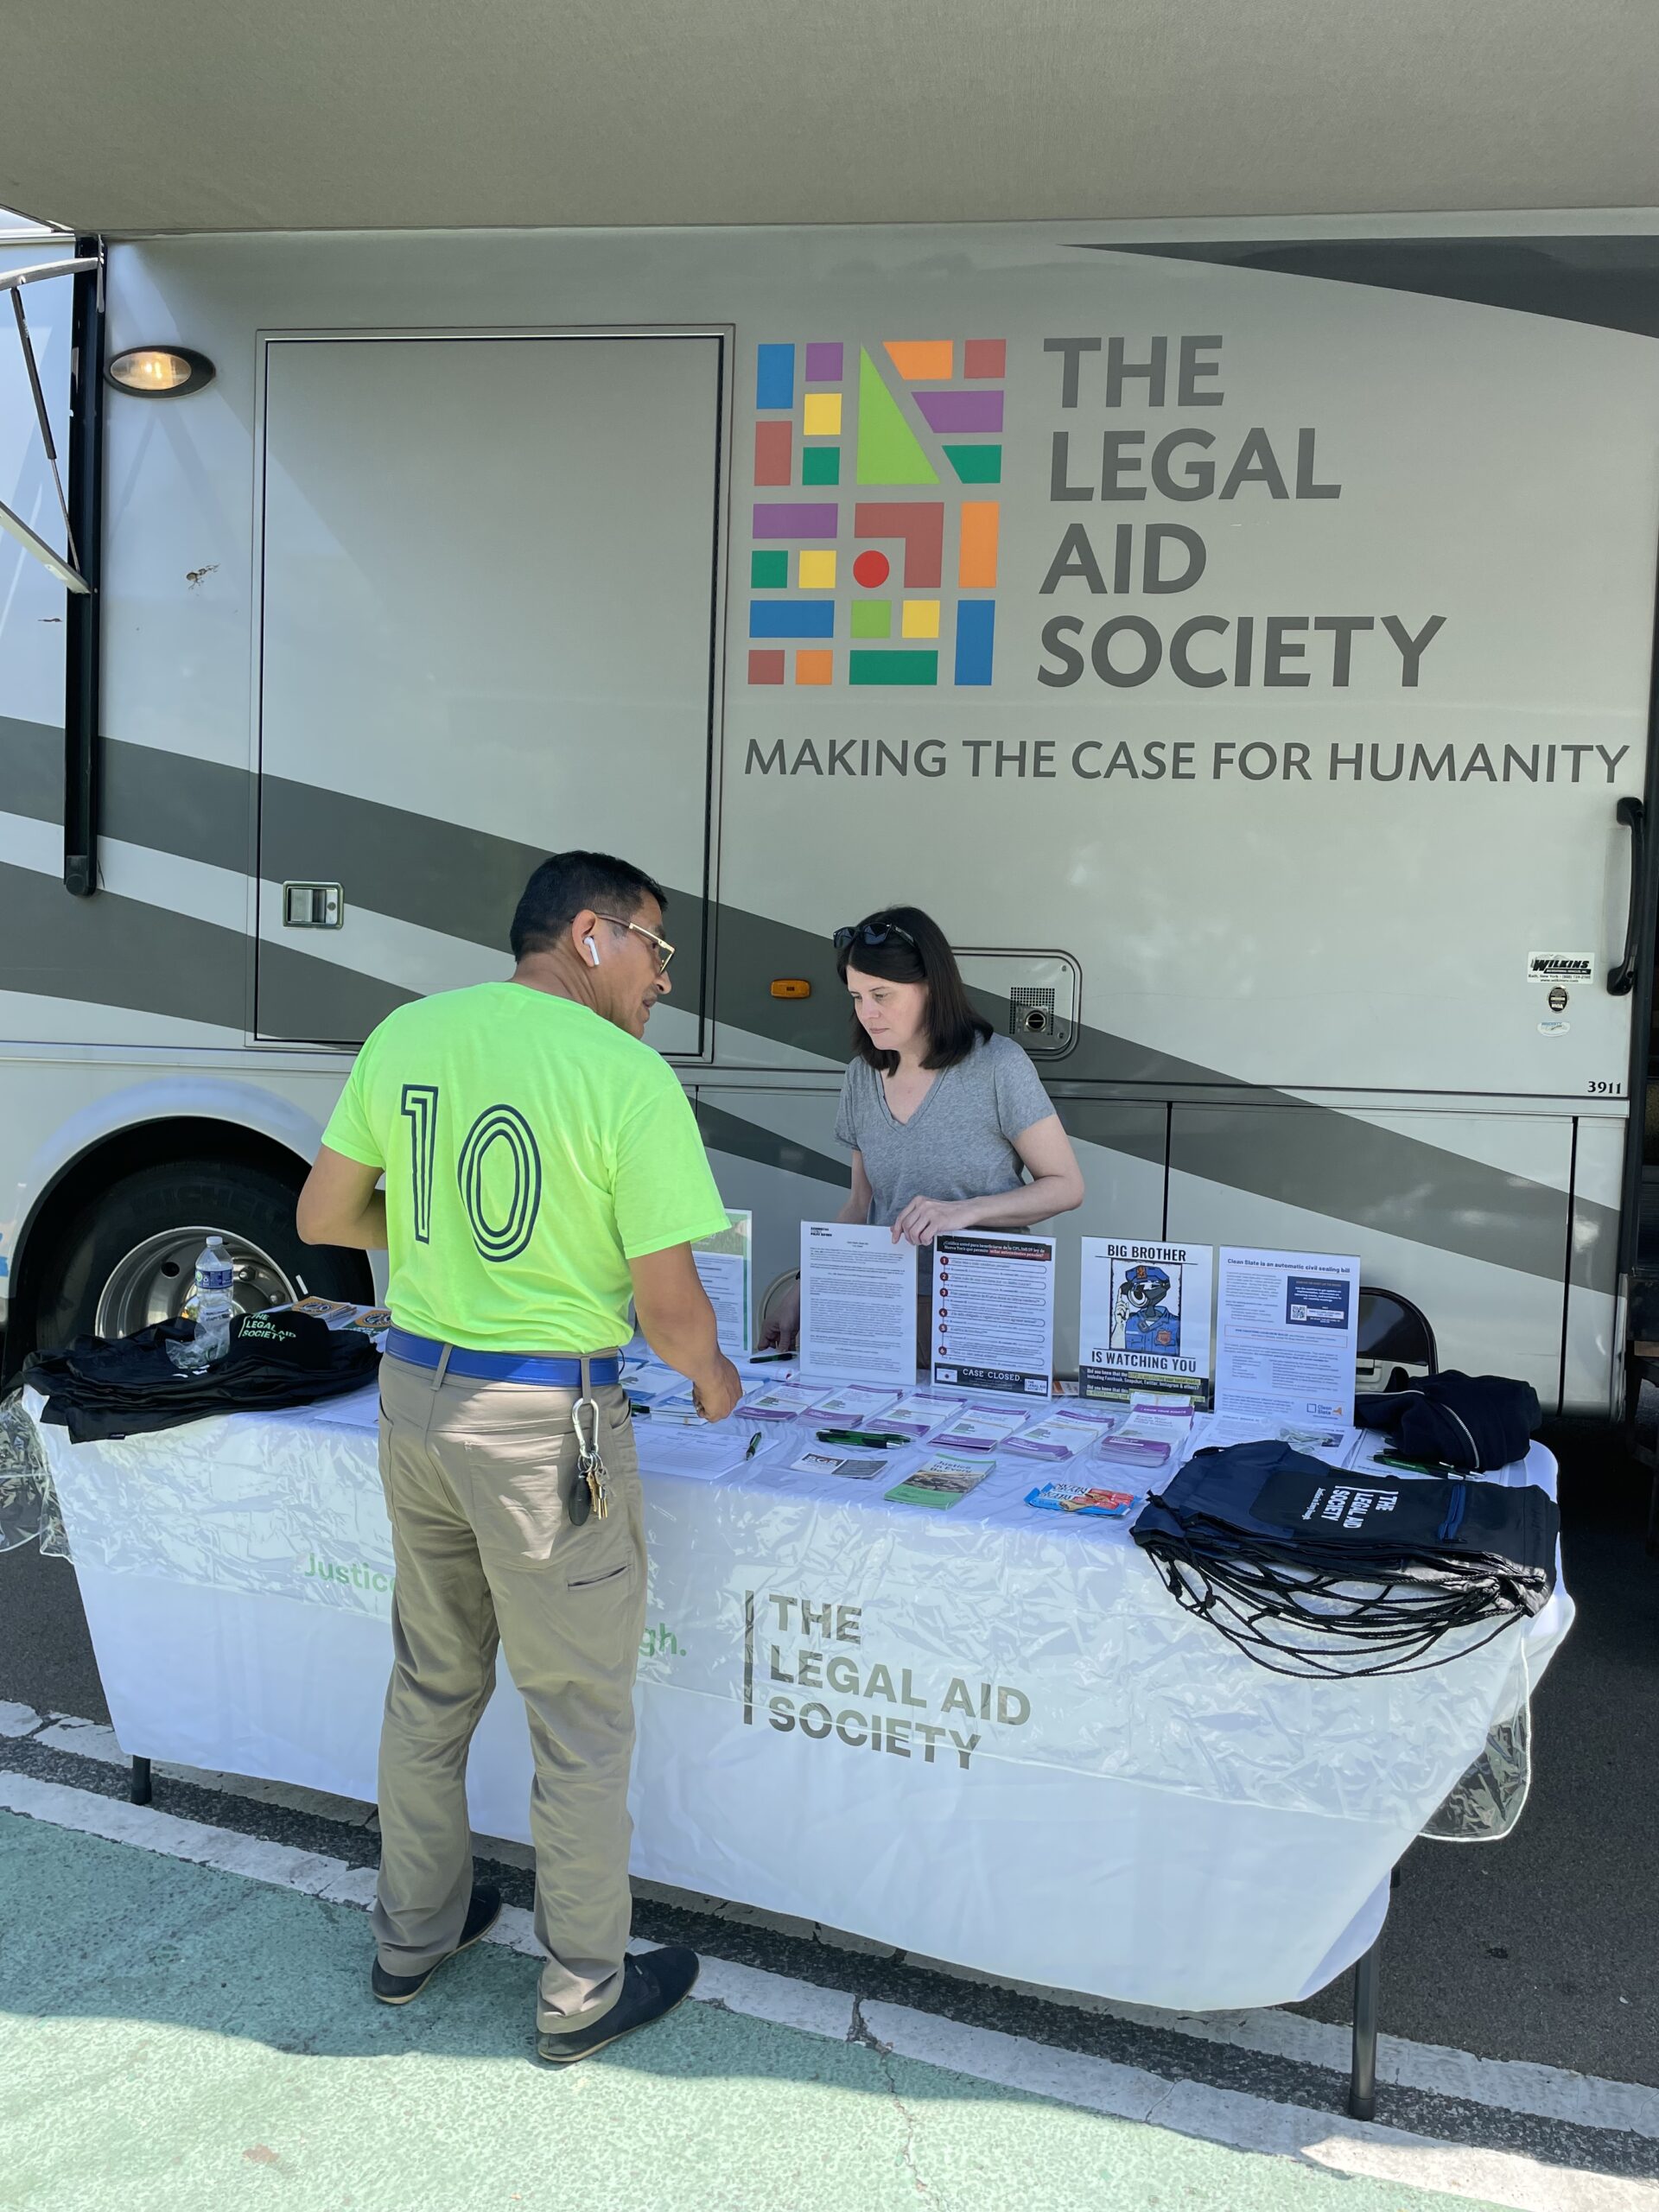 A resident consults with a legal advisor from the Justice Bus during its stop in Brooklyn as part of the Legal Aid Society’s initiative to provide free legal resources to NYCHA residents. Photo courtesy of Legal Aid NYC